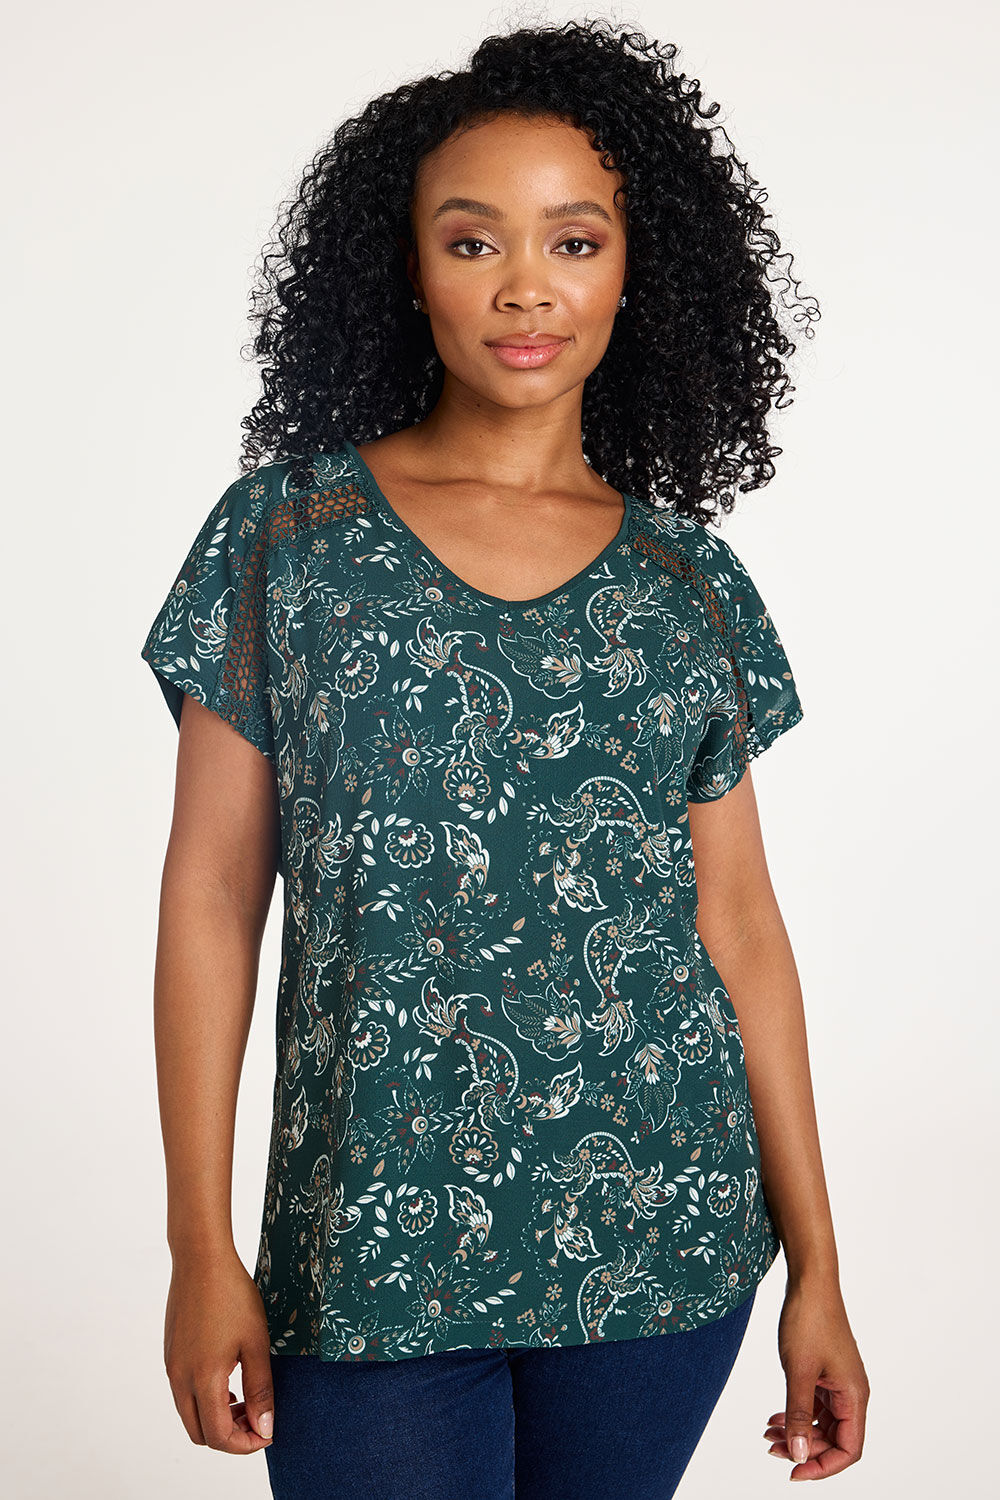 Bonmarche Green Short Sleeve Paisley Print Woven Front Top, Size: 12